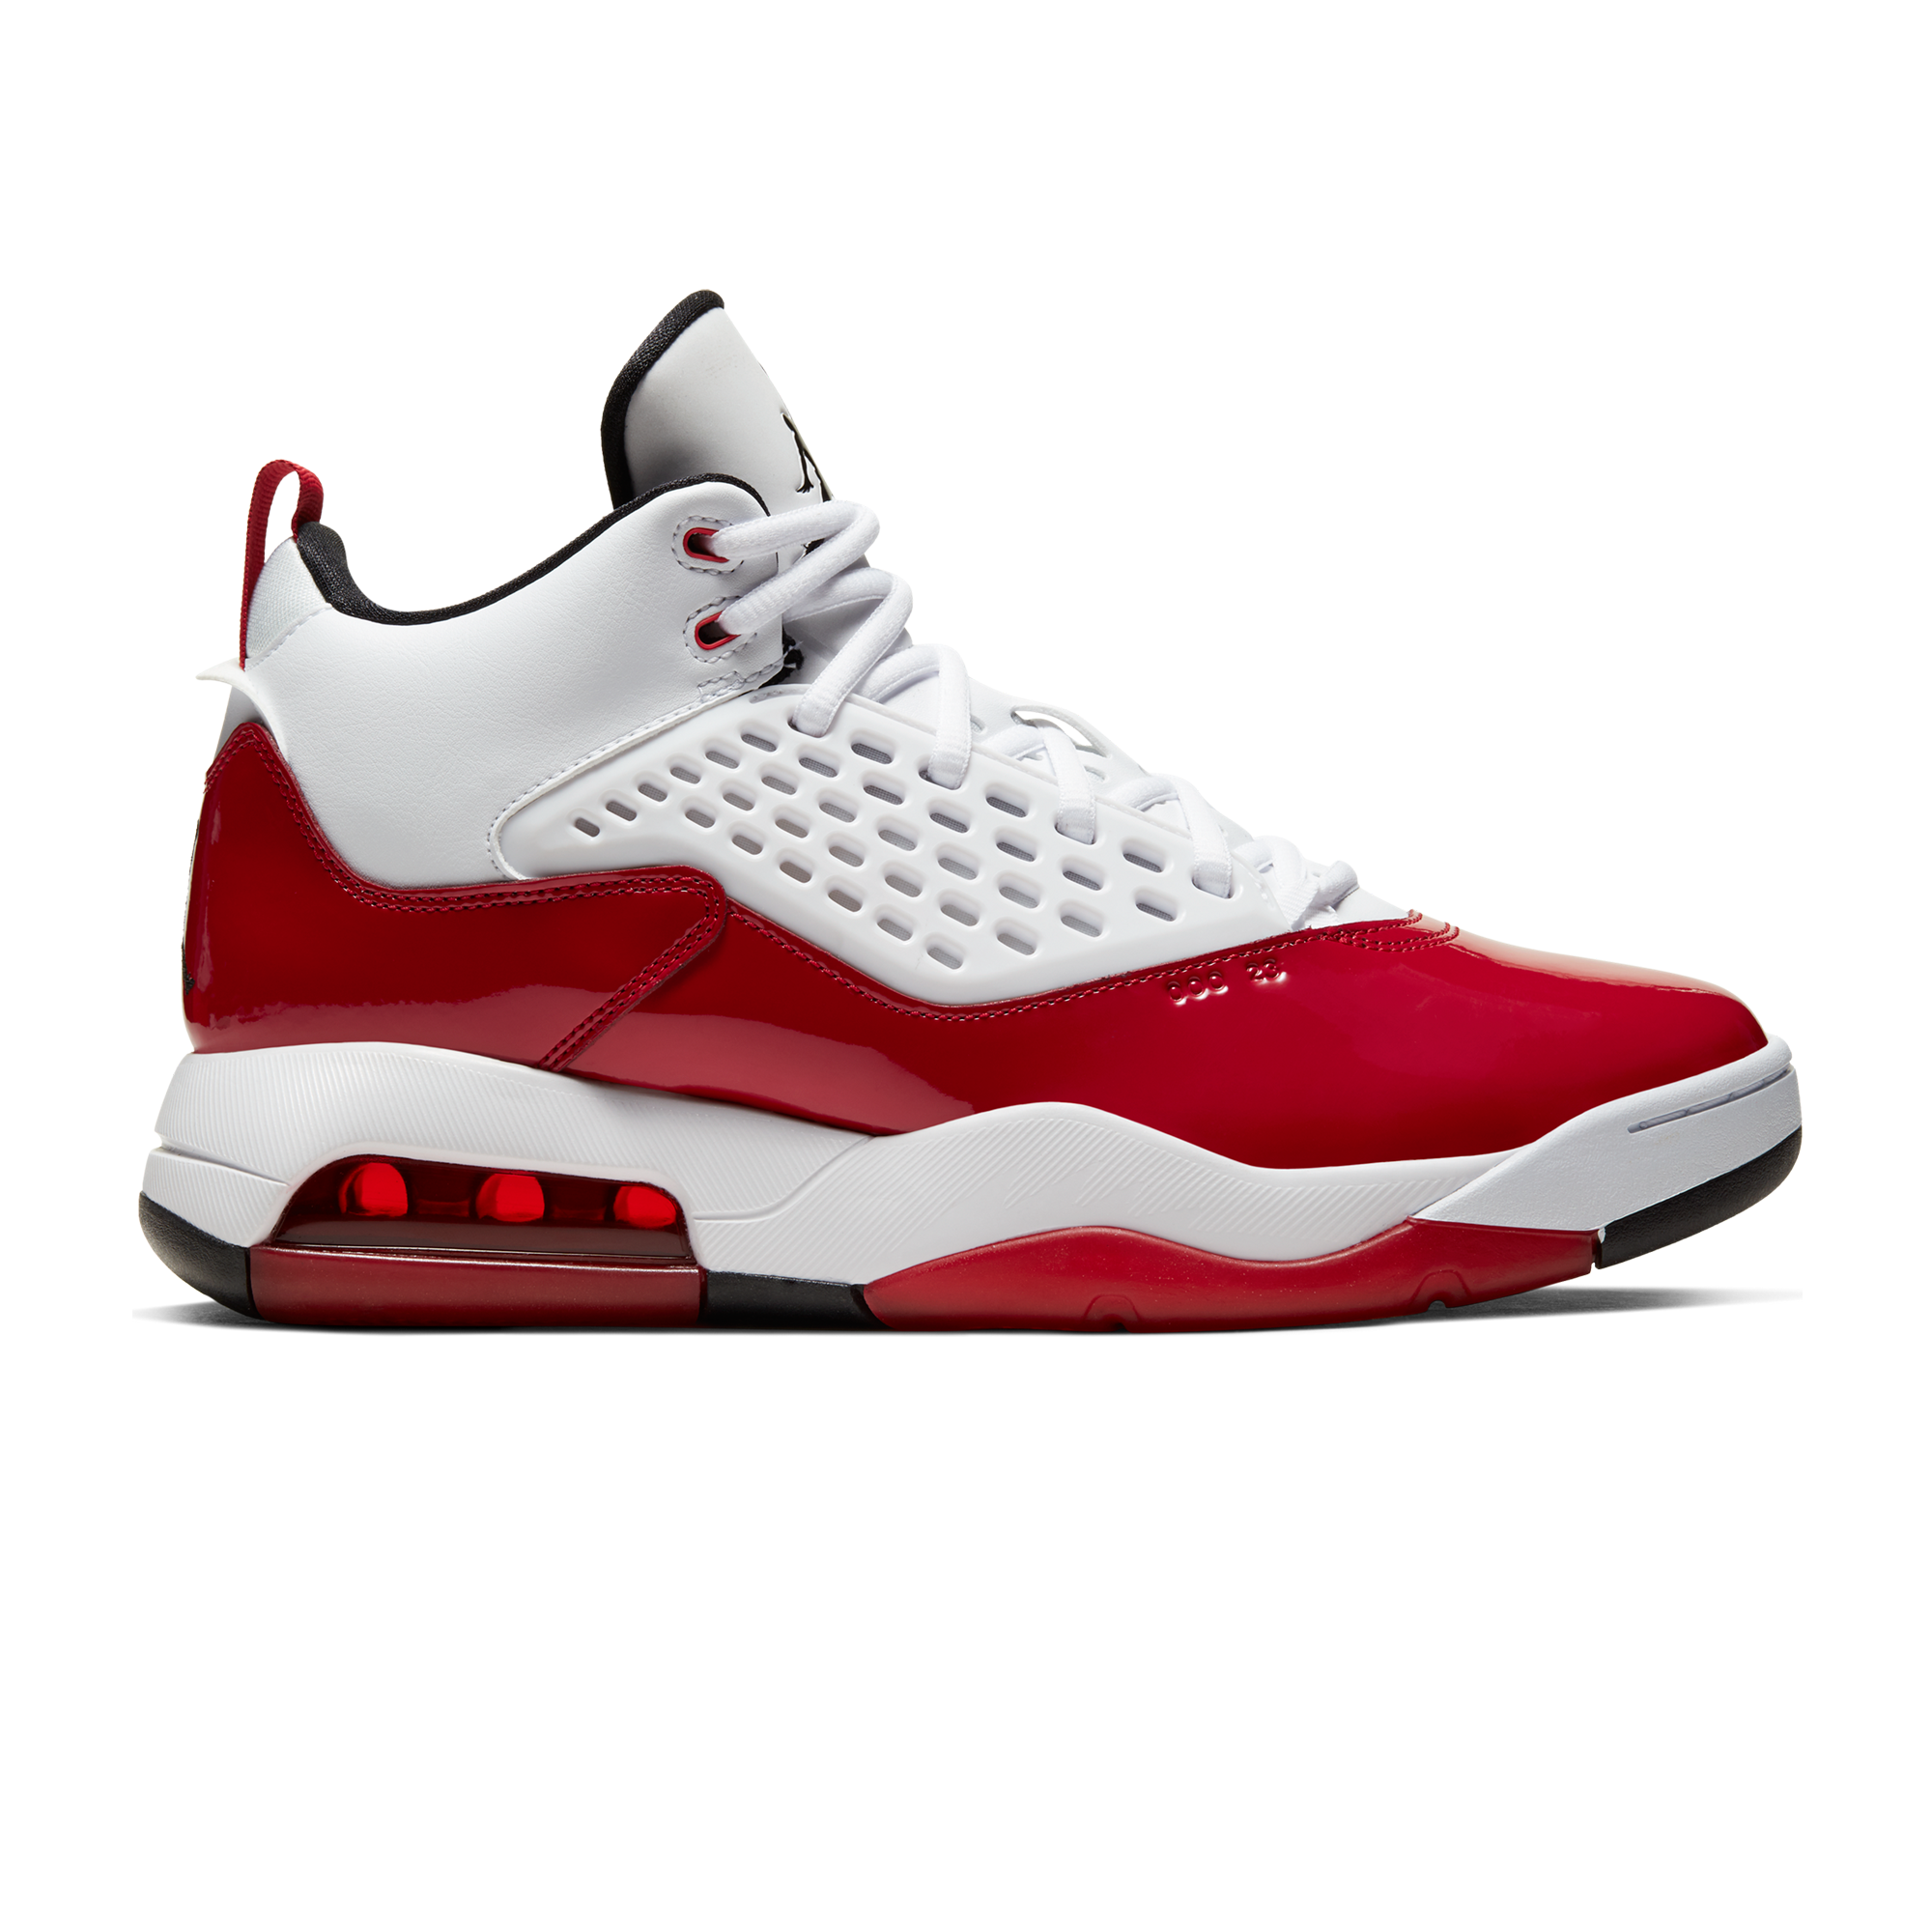 air max femme courir jordan51% OFF Adidas NMD red color